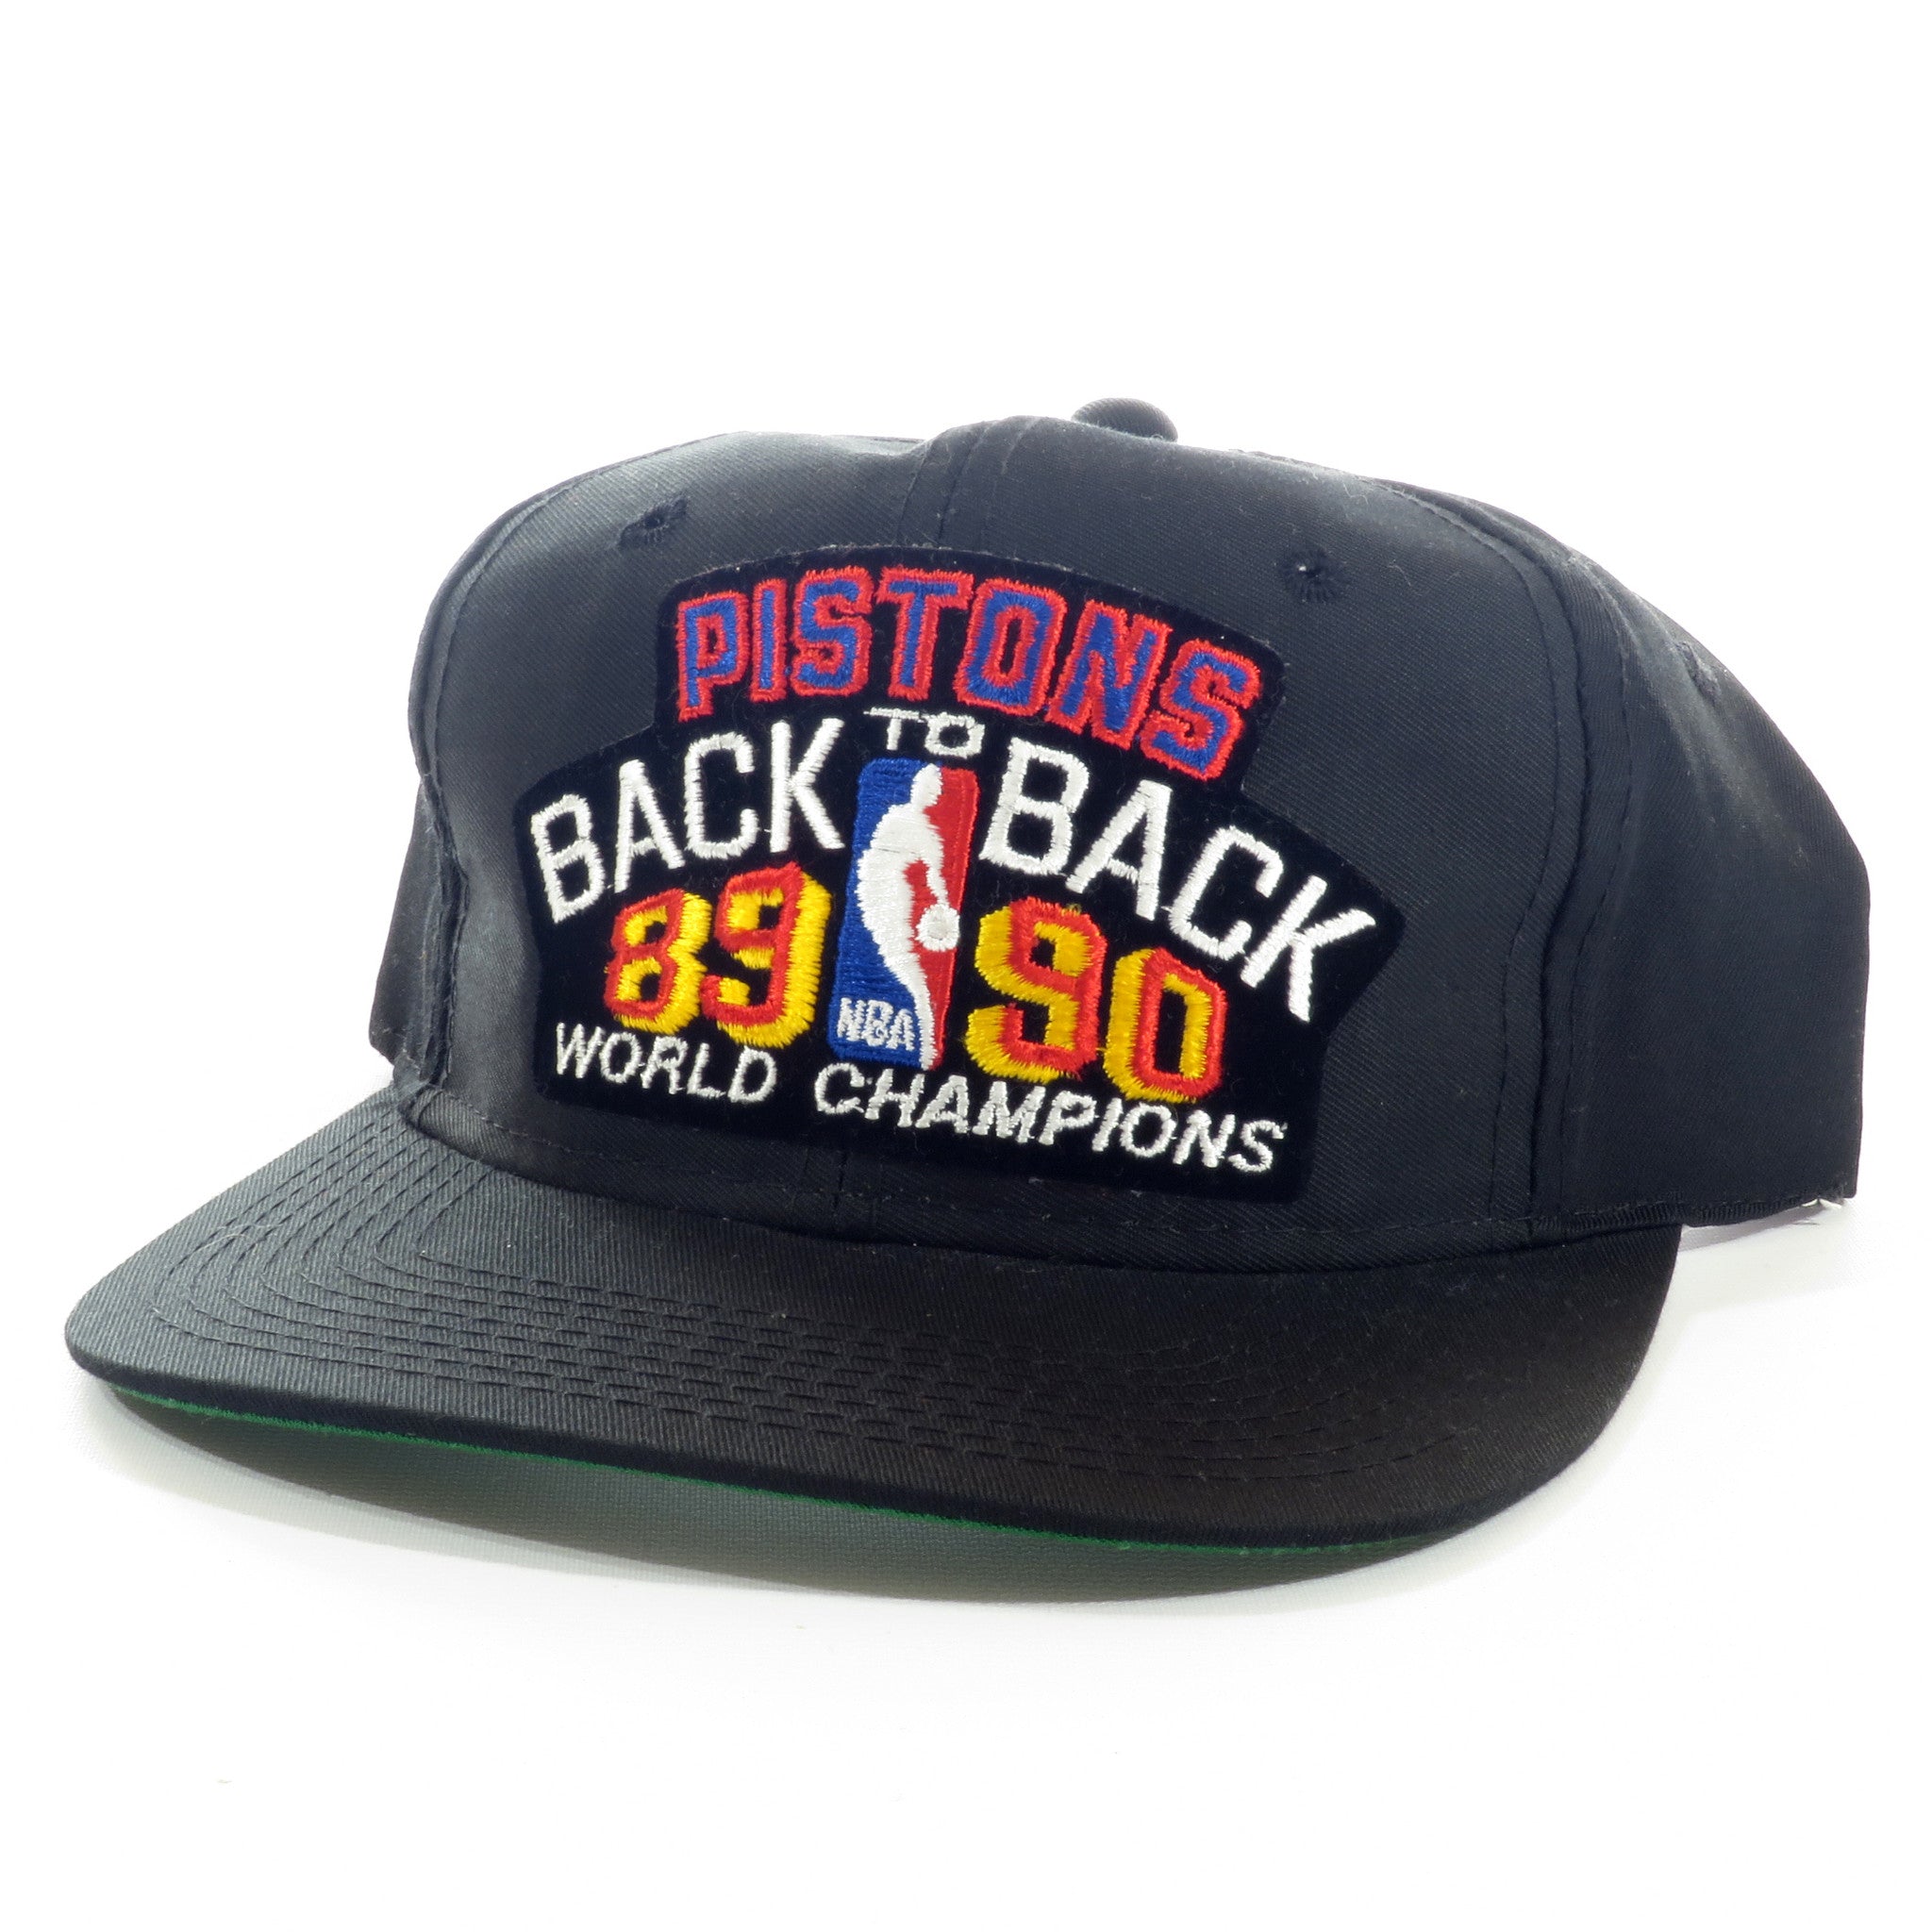 Detroit Pistons Sports Specialties 89-90 Back to Back Champions Snapback Hat